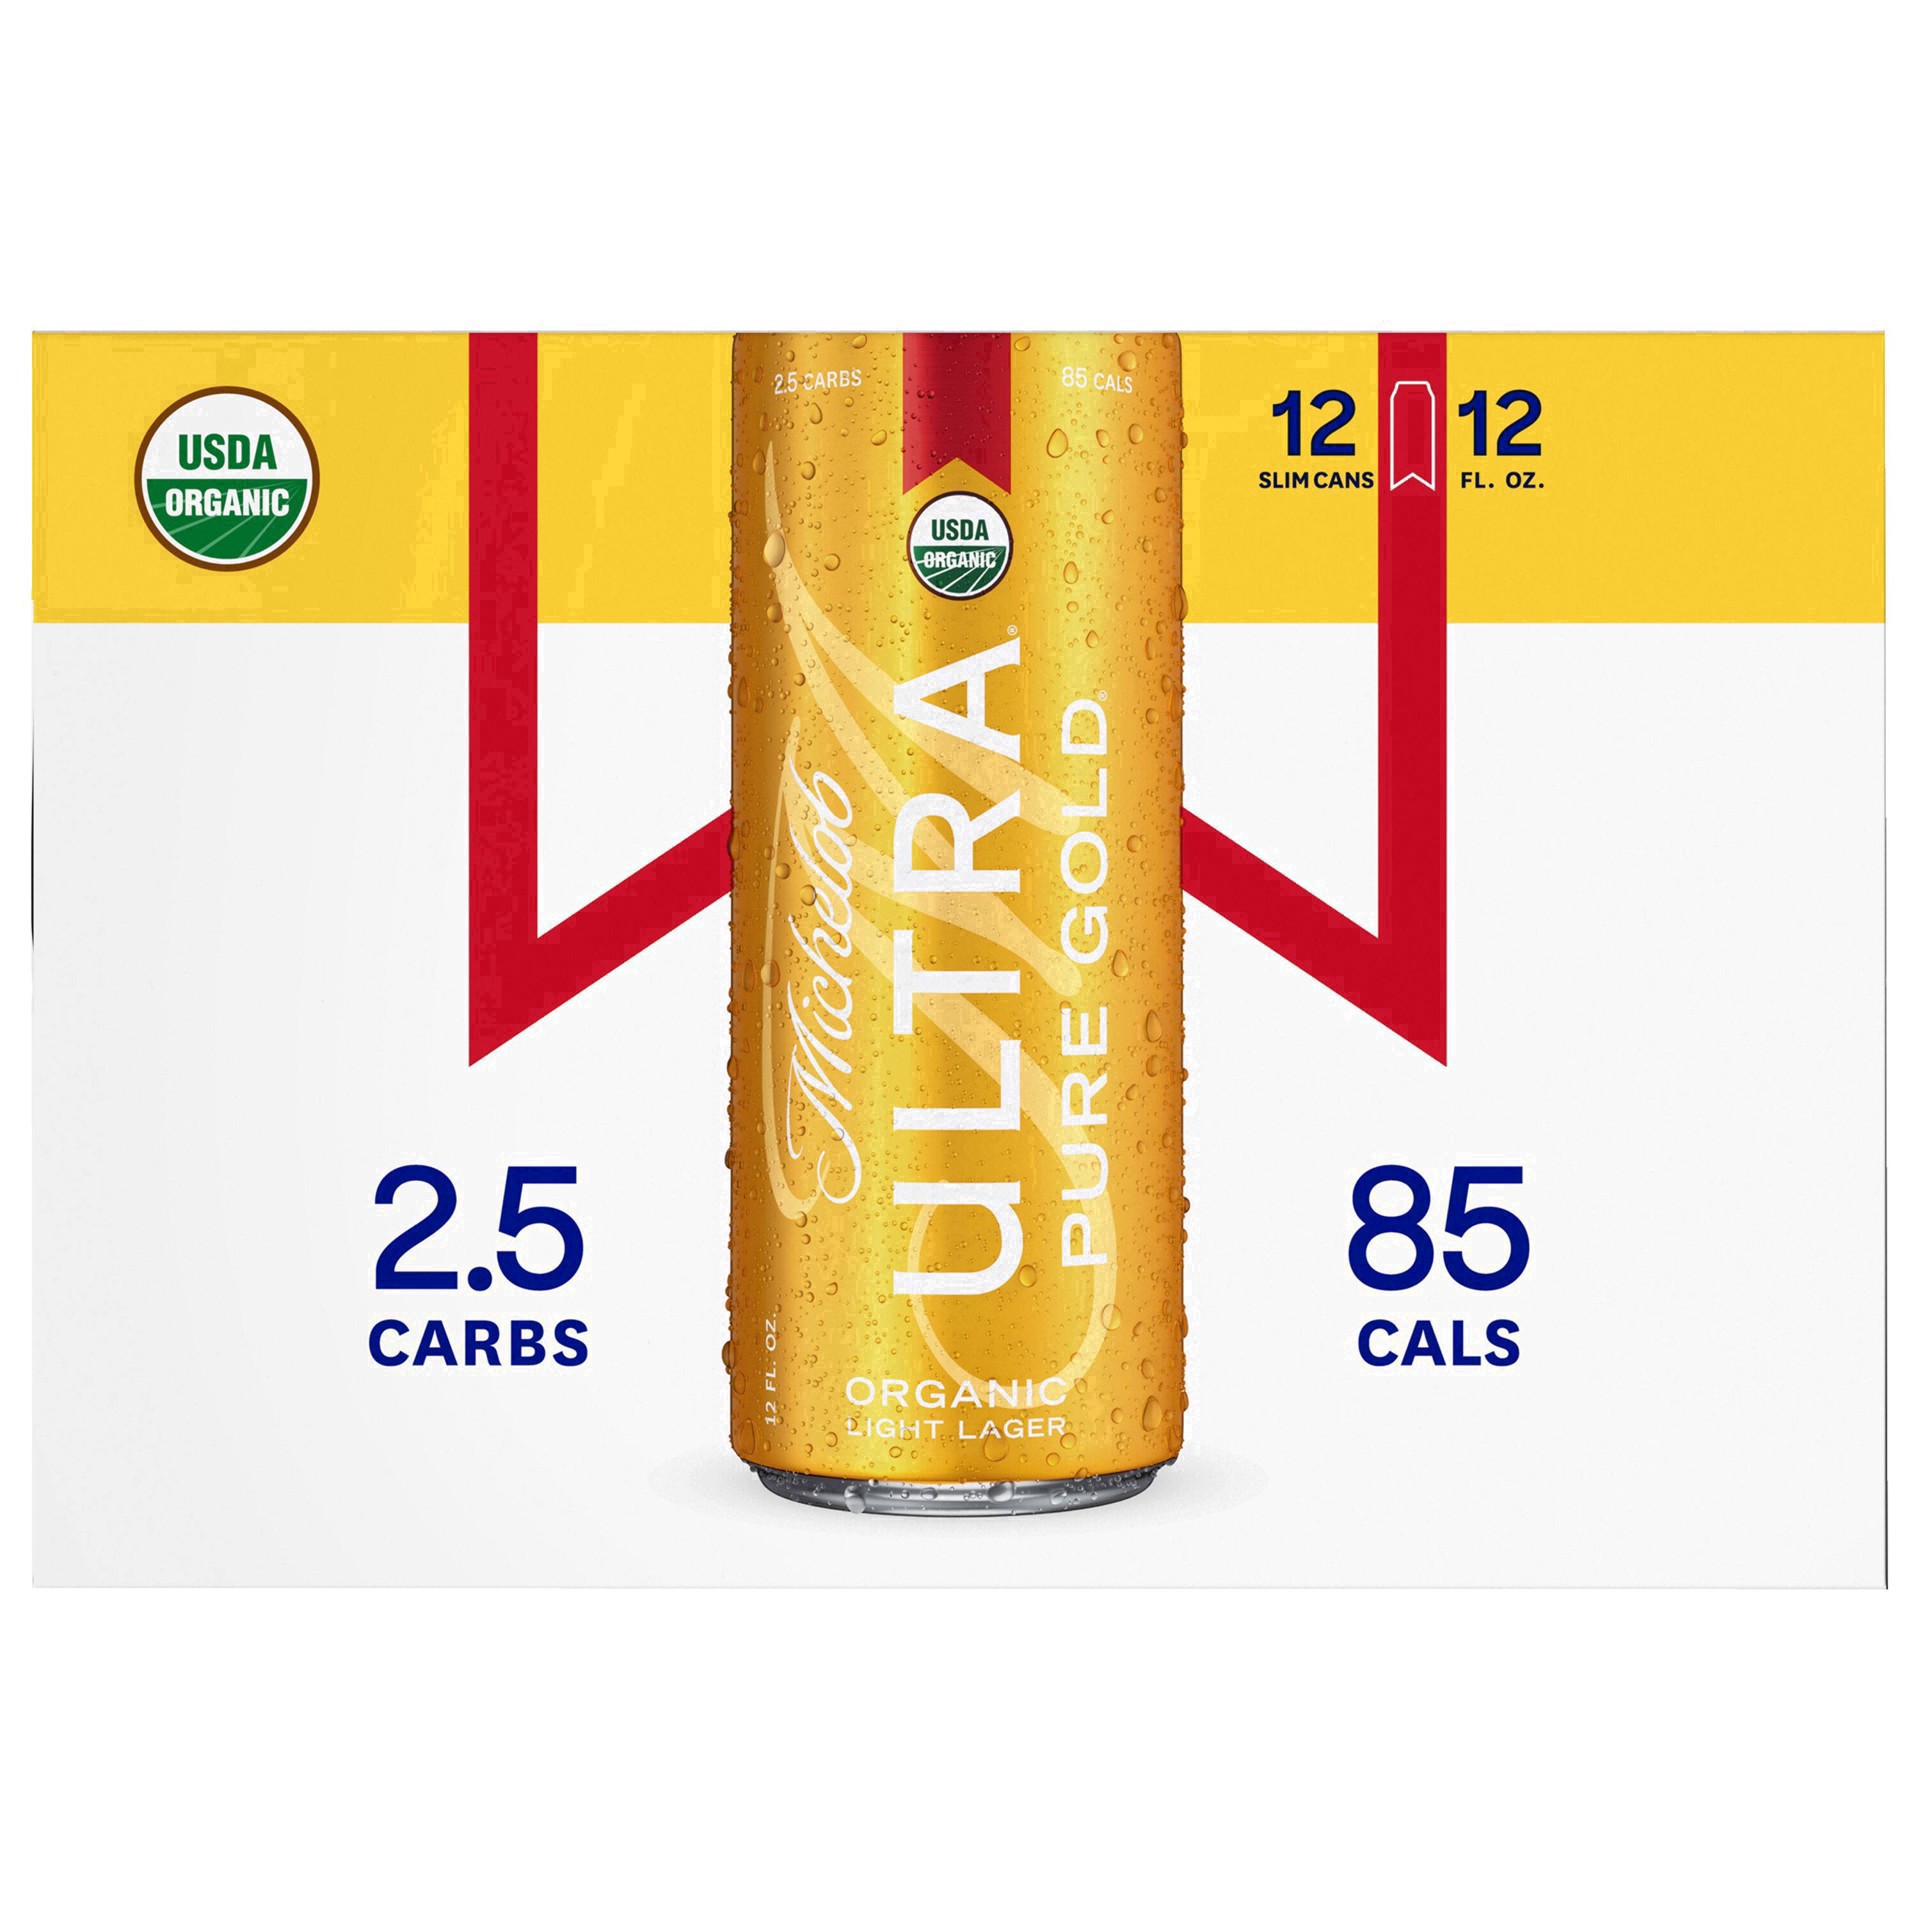 slide 20 of 134, Michelob Ultra Pure Gold Organic Light Lager Beer, 12-12 fl. oz. Cans, 12 ct; 12 oz